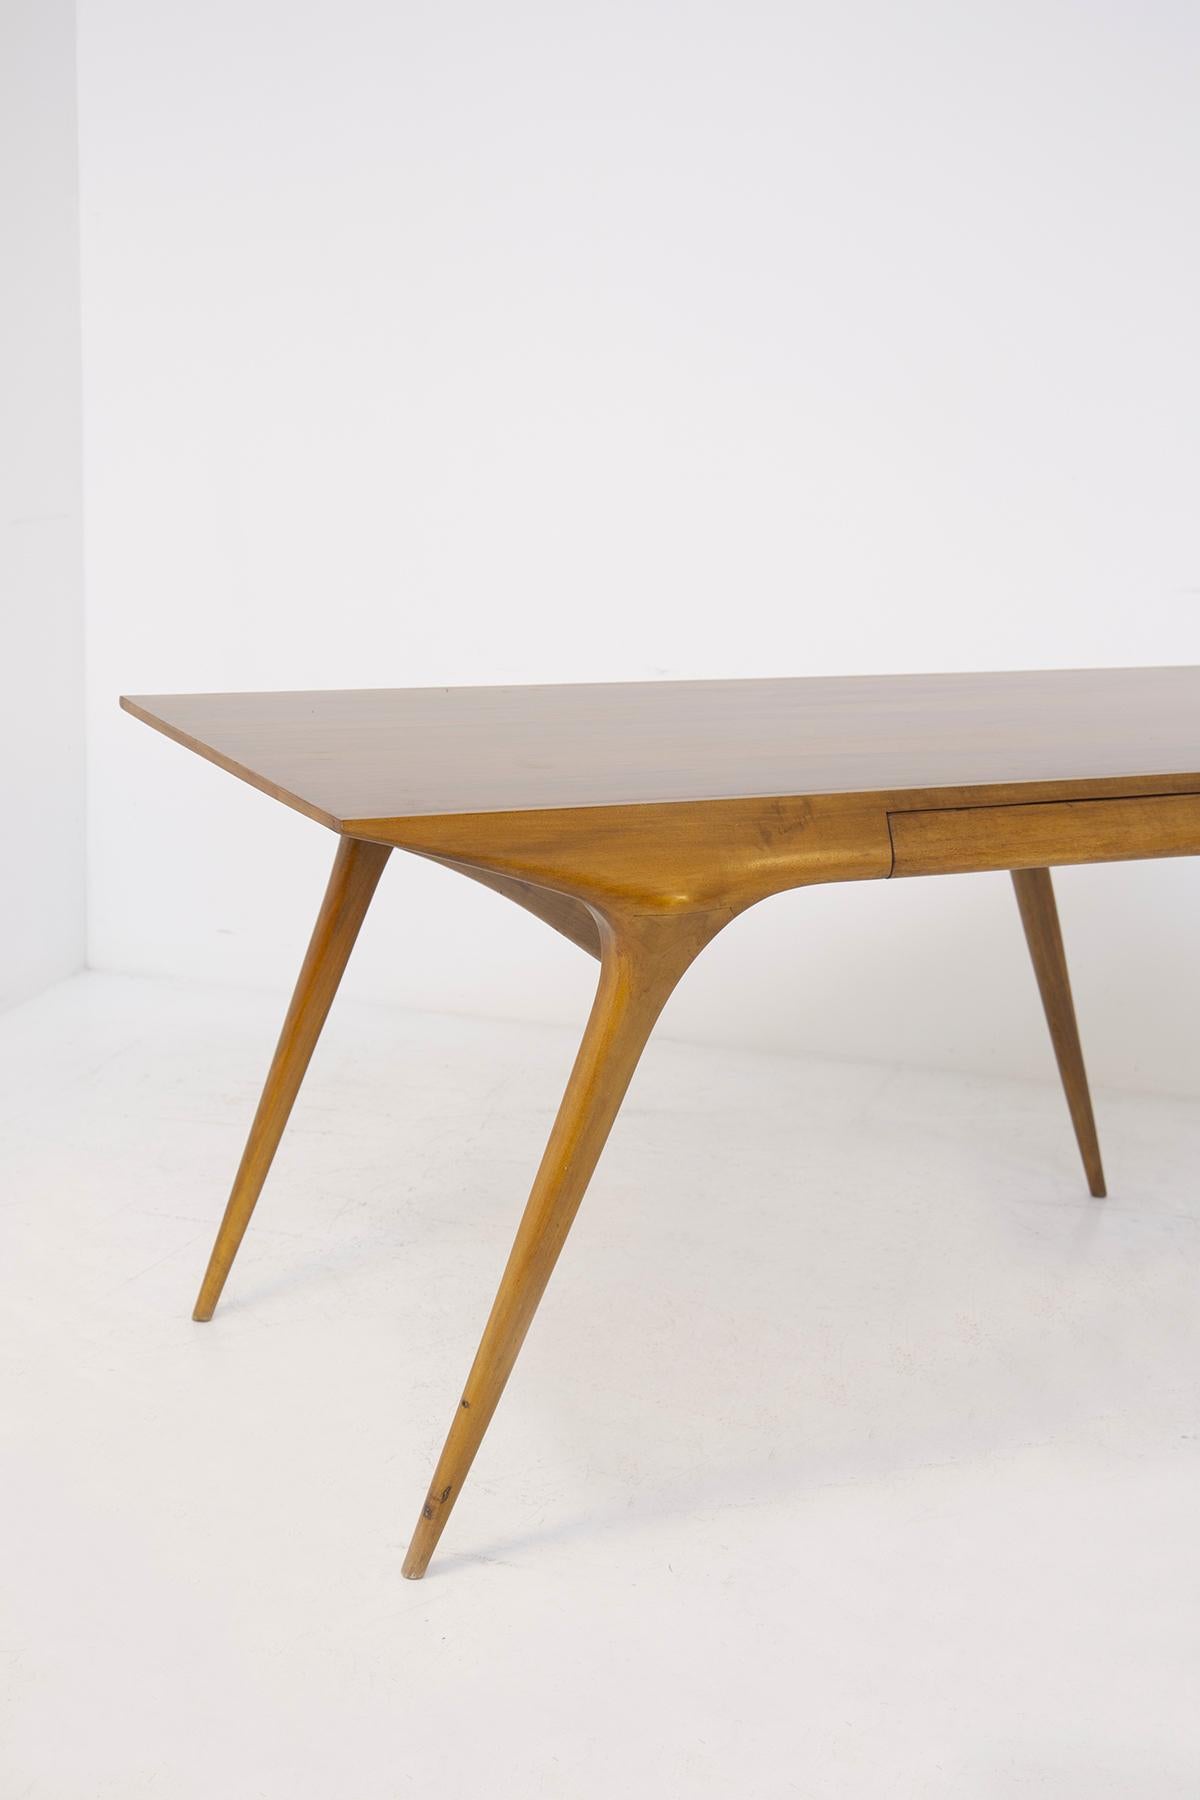 Beautiful desk designed by Carlo de Carli, 1950.
Of great beauty and design, the desk is made entirely of walnut wood. The great particularity are its ashlars present at the beginning of its legs. The tapered legs elegantly complete the piece of